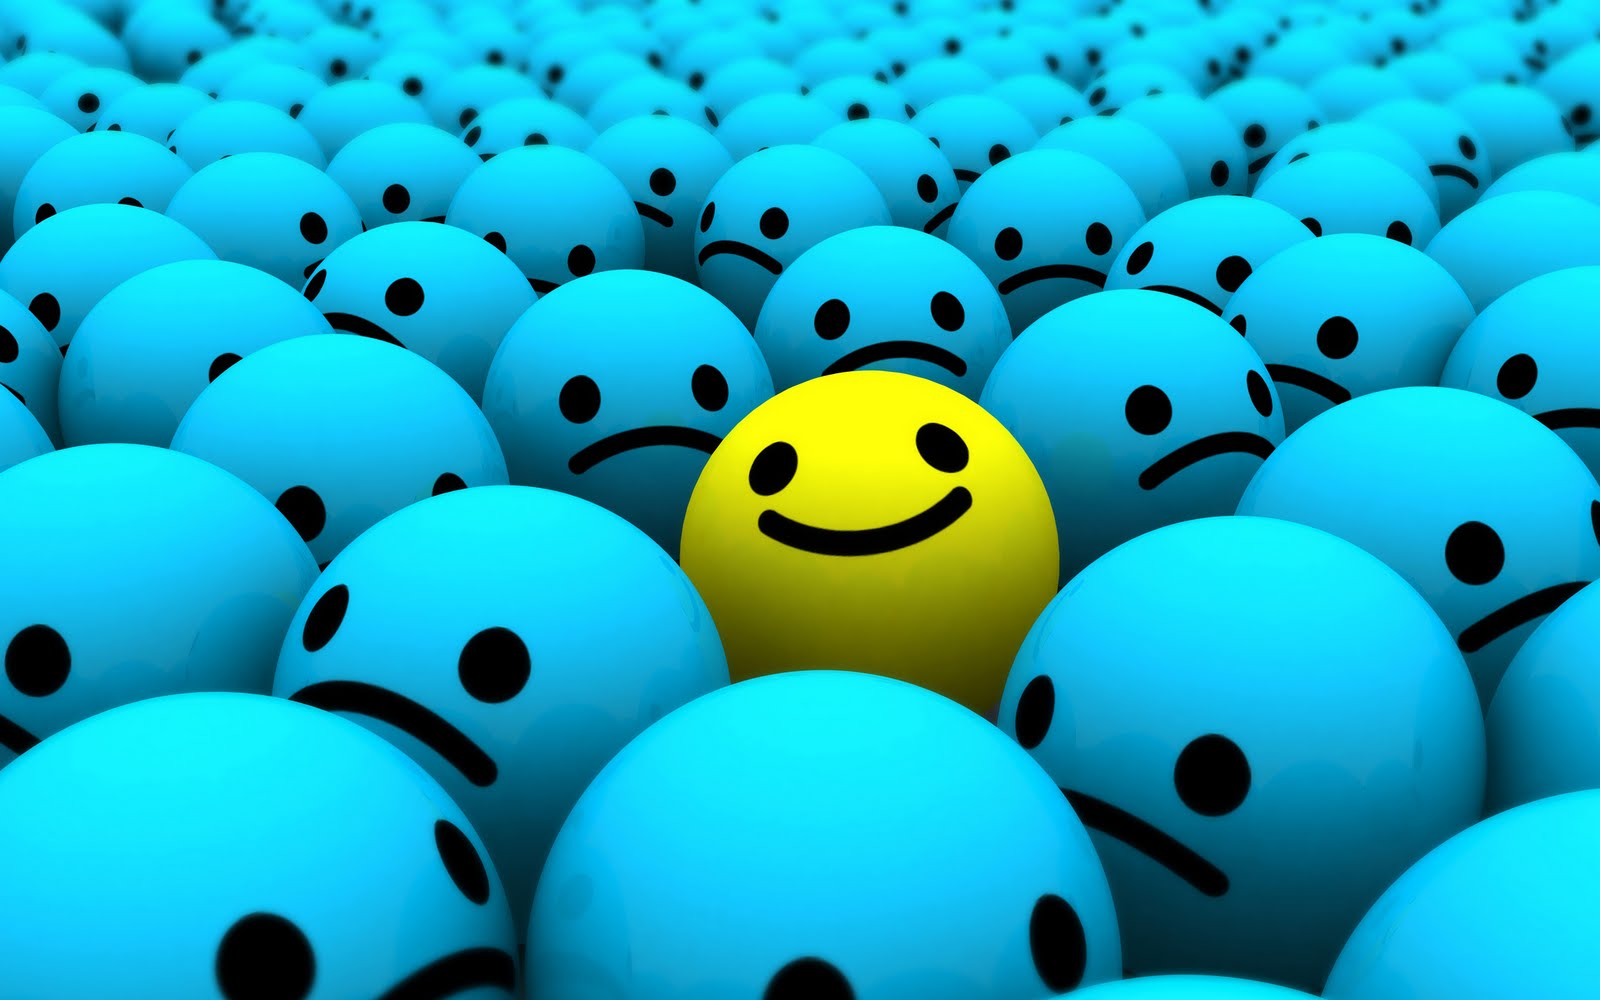 HD Smile Icon Backgrounds Emotion Wallpapers Download Free Wallpapers